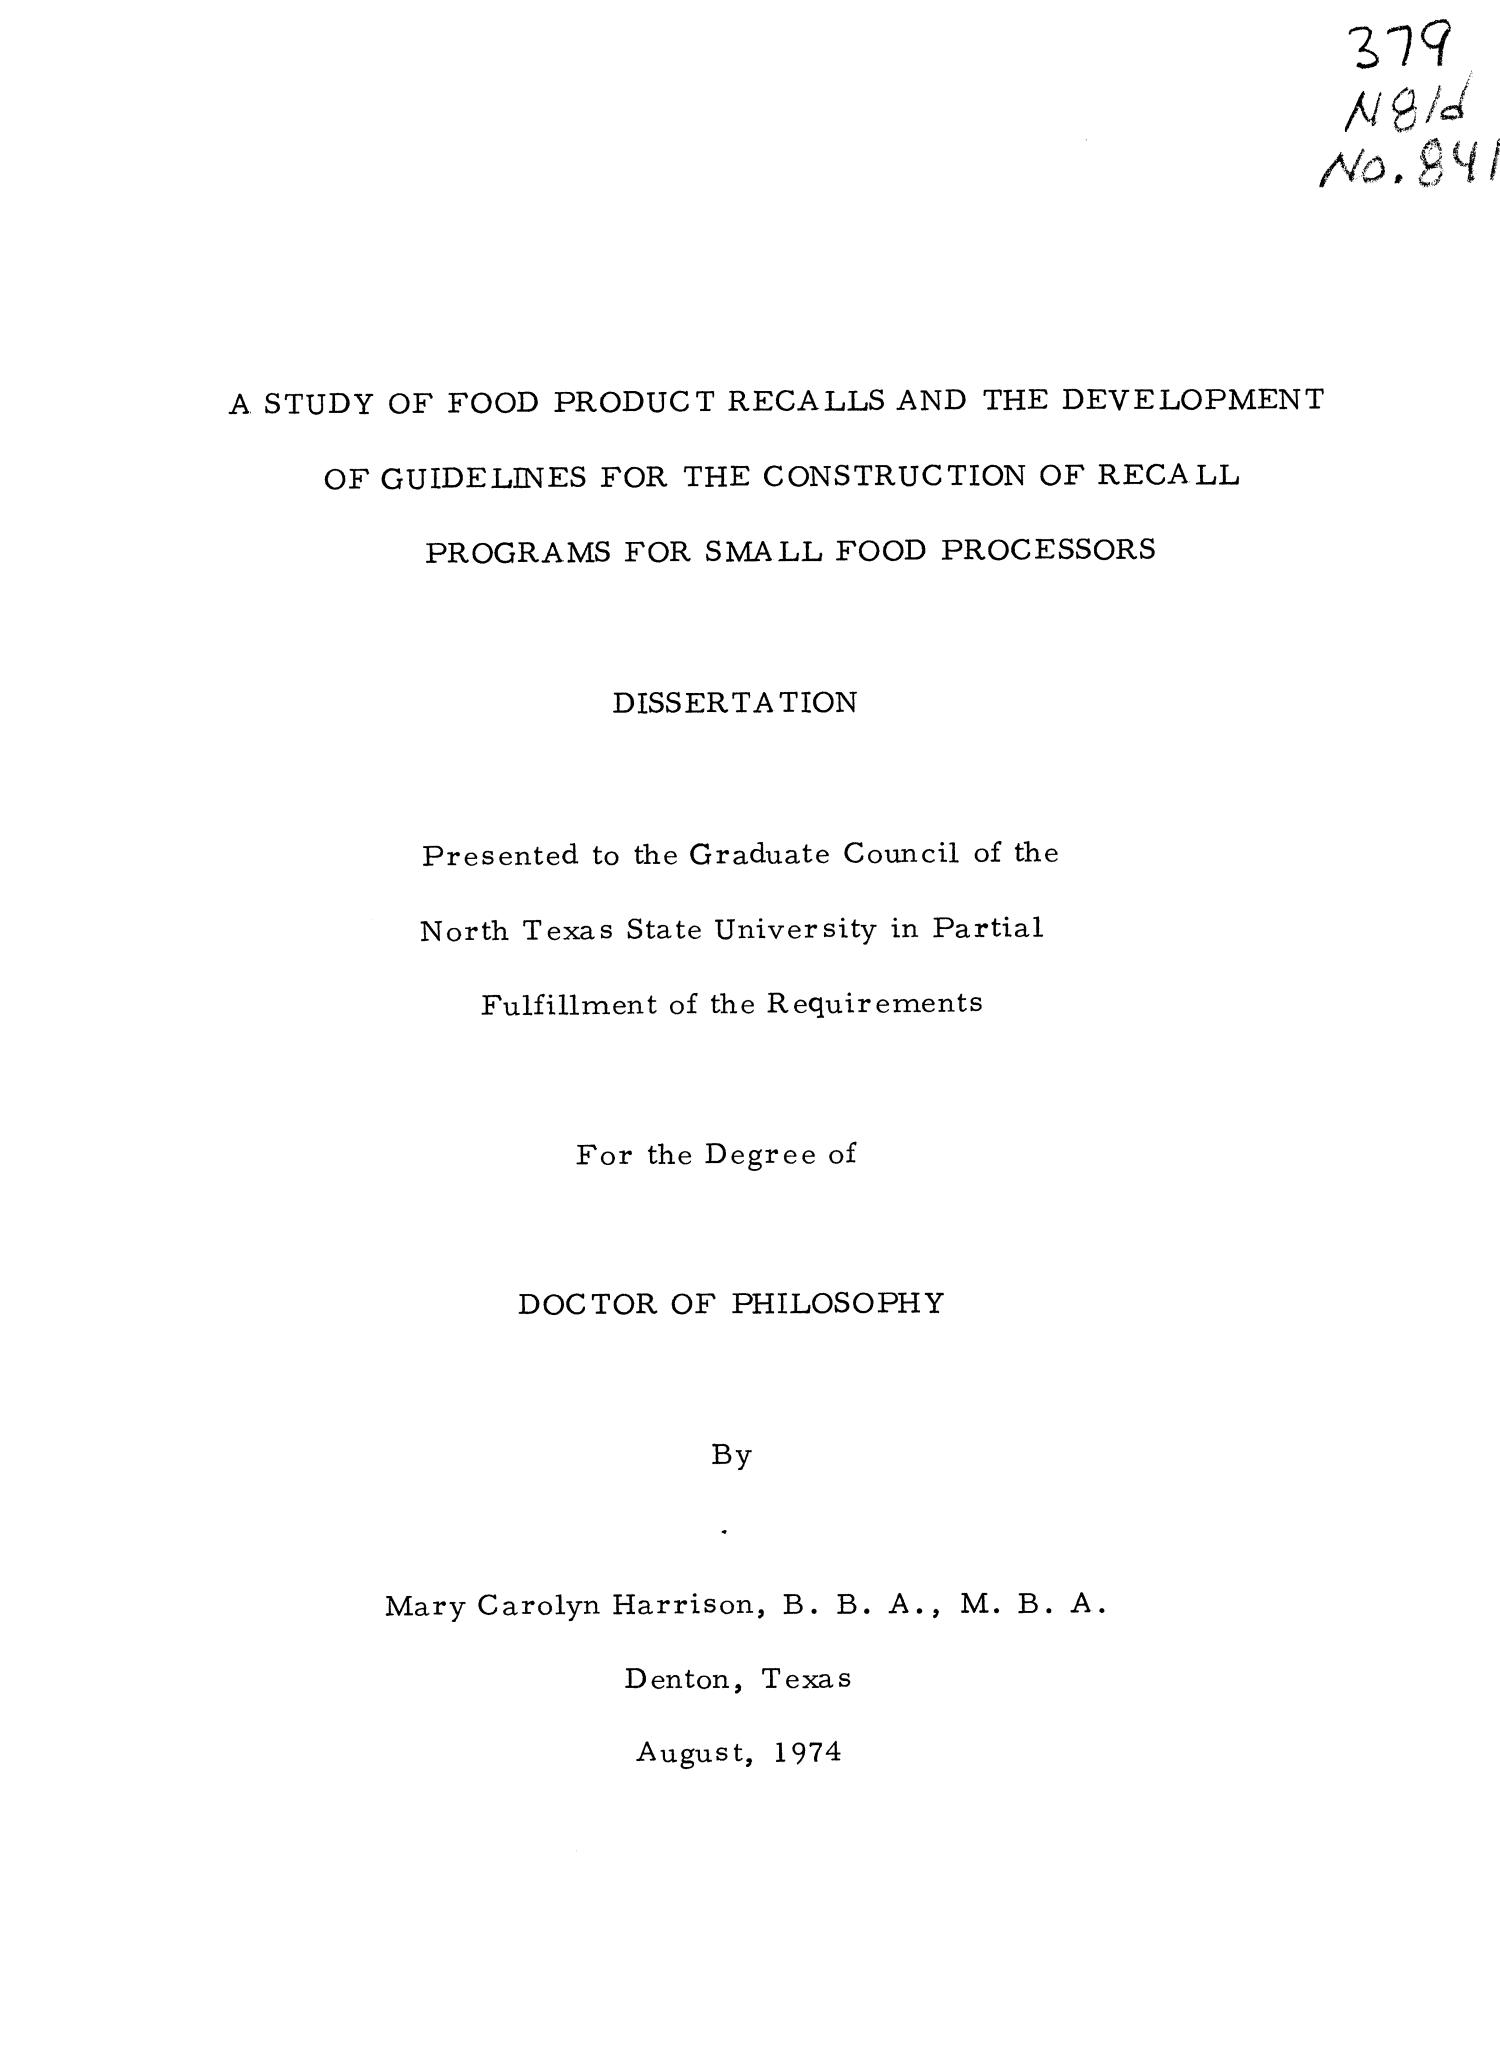 A Study of Food Product Recalls and the Development of Guidelines for the Construction of Recall Programs for Small Food Processors
                                                
                                                    Title Page
                                                